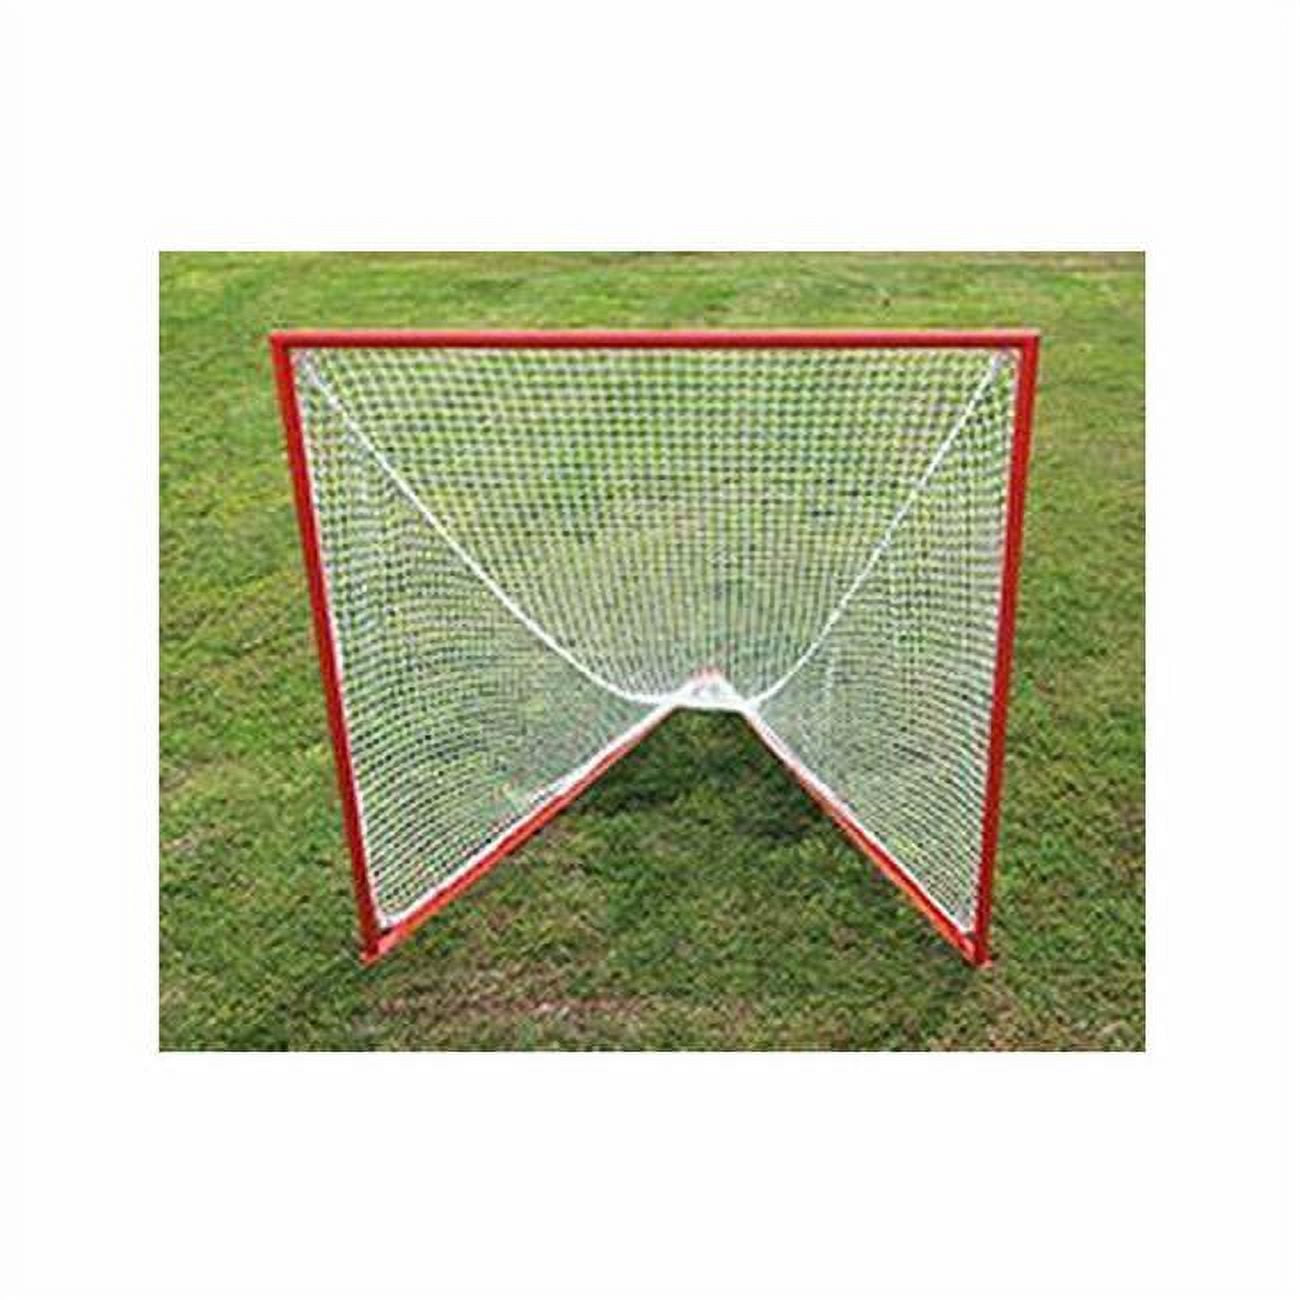 Picture of Cimarron Sports CMW-667LG 6 x 6 x 7 ft. Lacrosse Goal Only